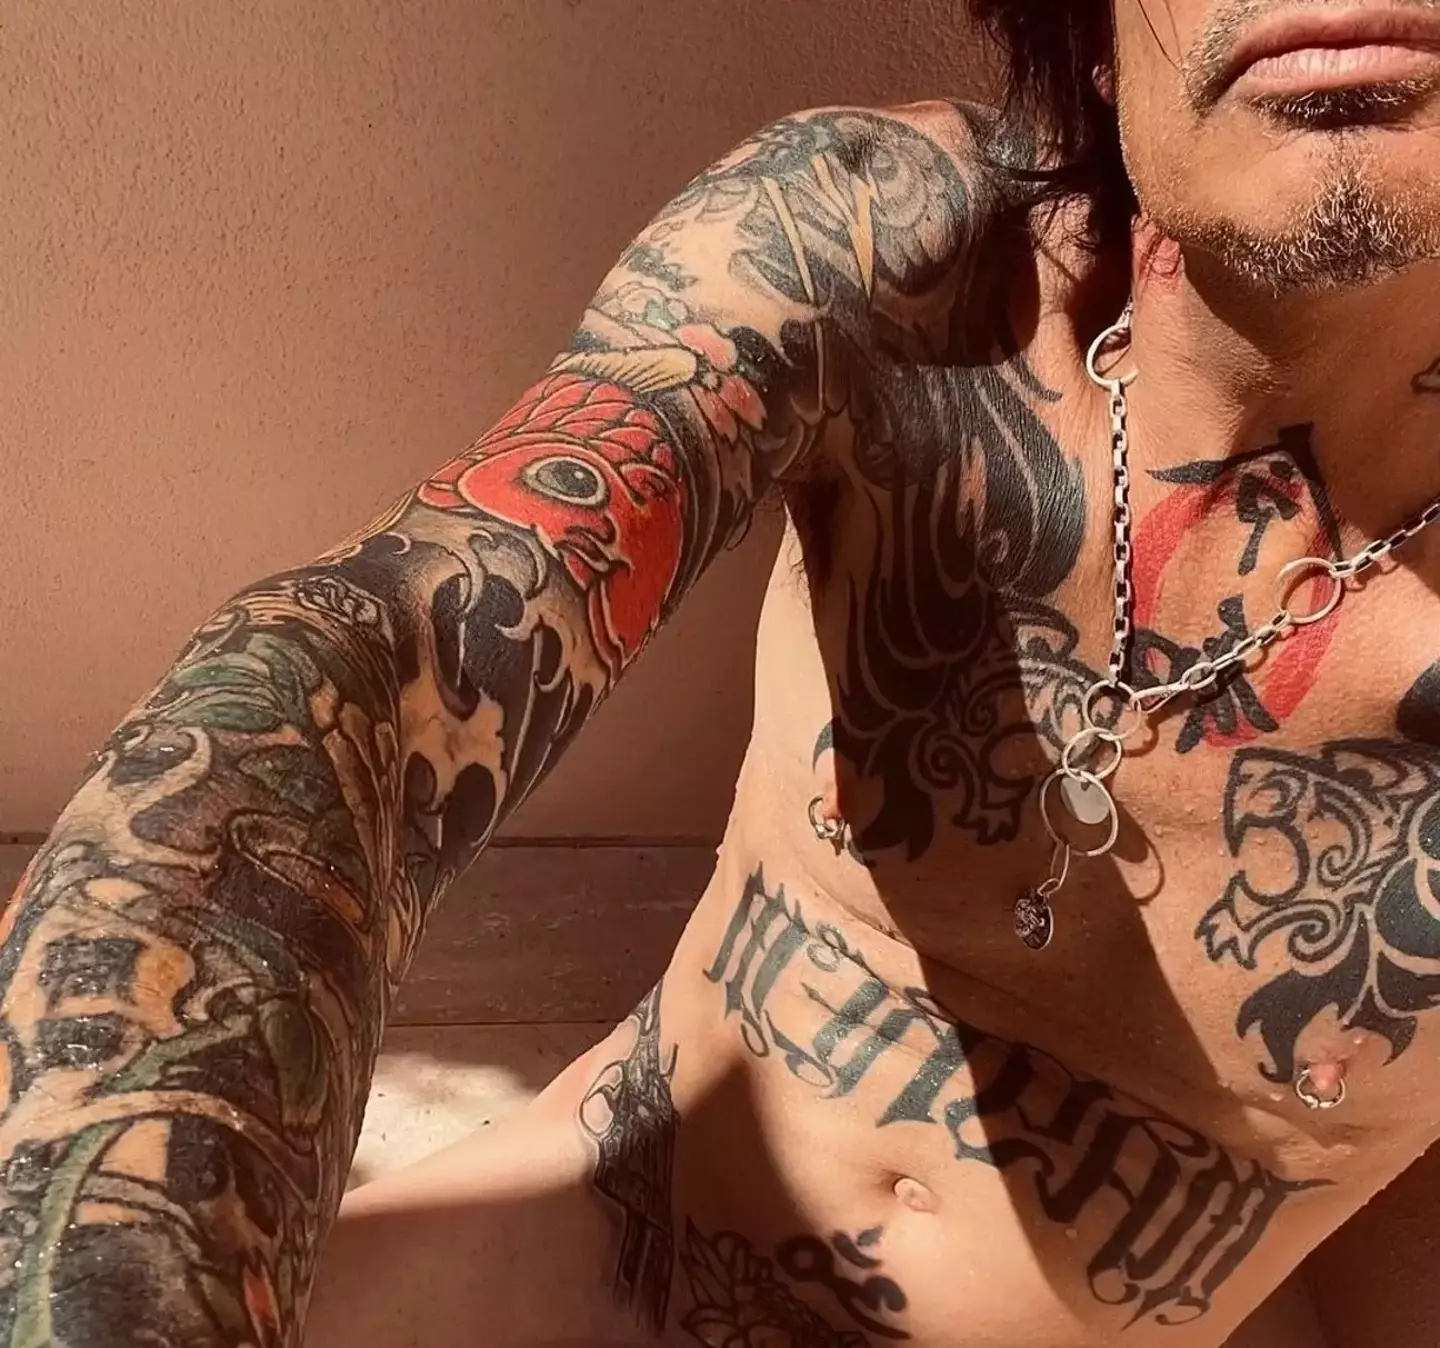 An adult content site has become the first porn site to invite Tommy Lee to join the platform.